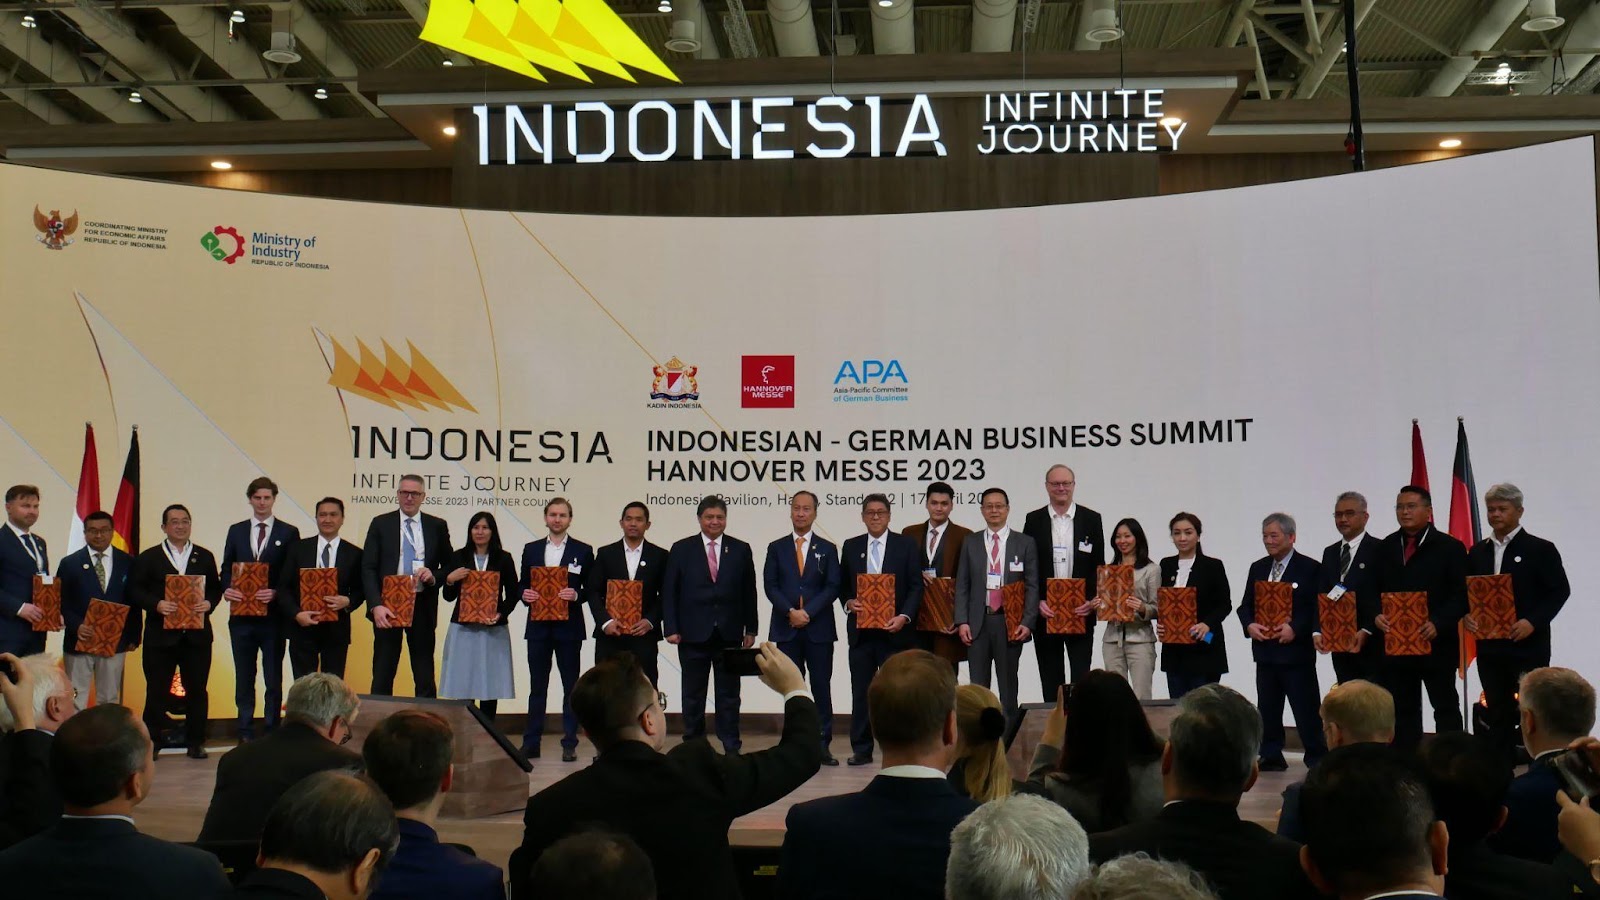 Hannover Messe 2023, Indonesian Businesses Present Opportunities For The Advancement of Industrial Waste Treatment Technology and The Circular Economy